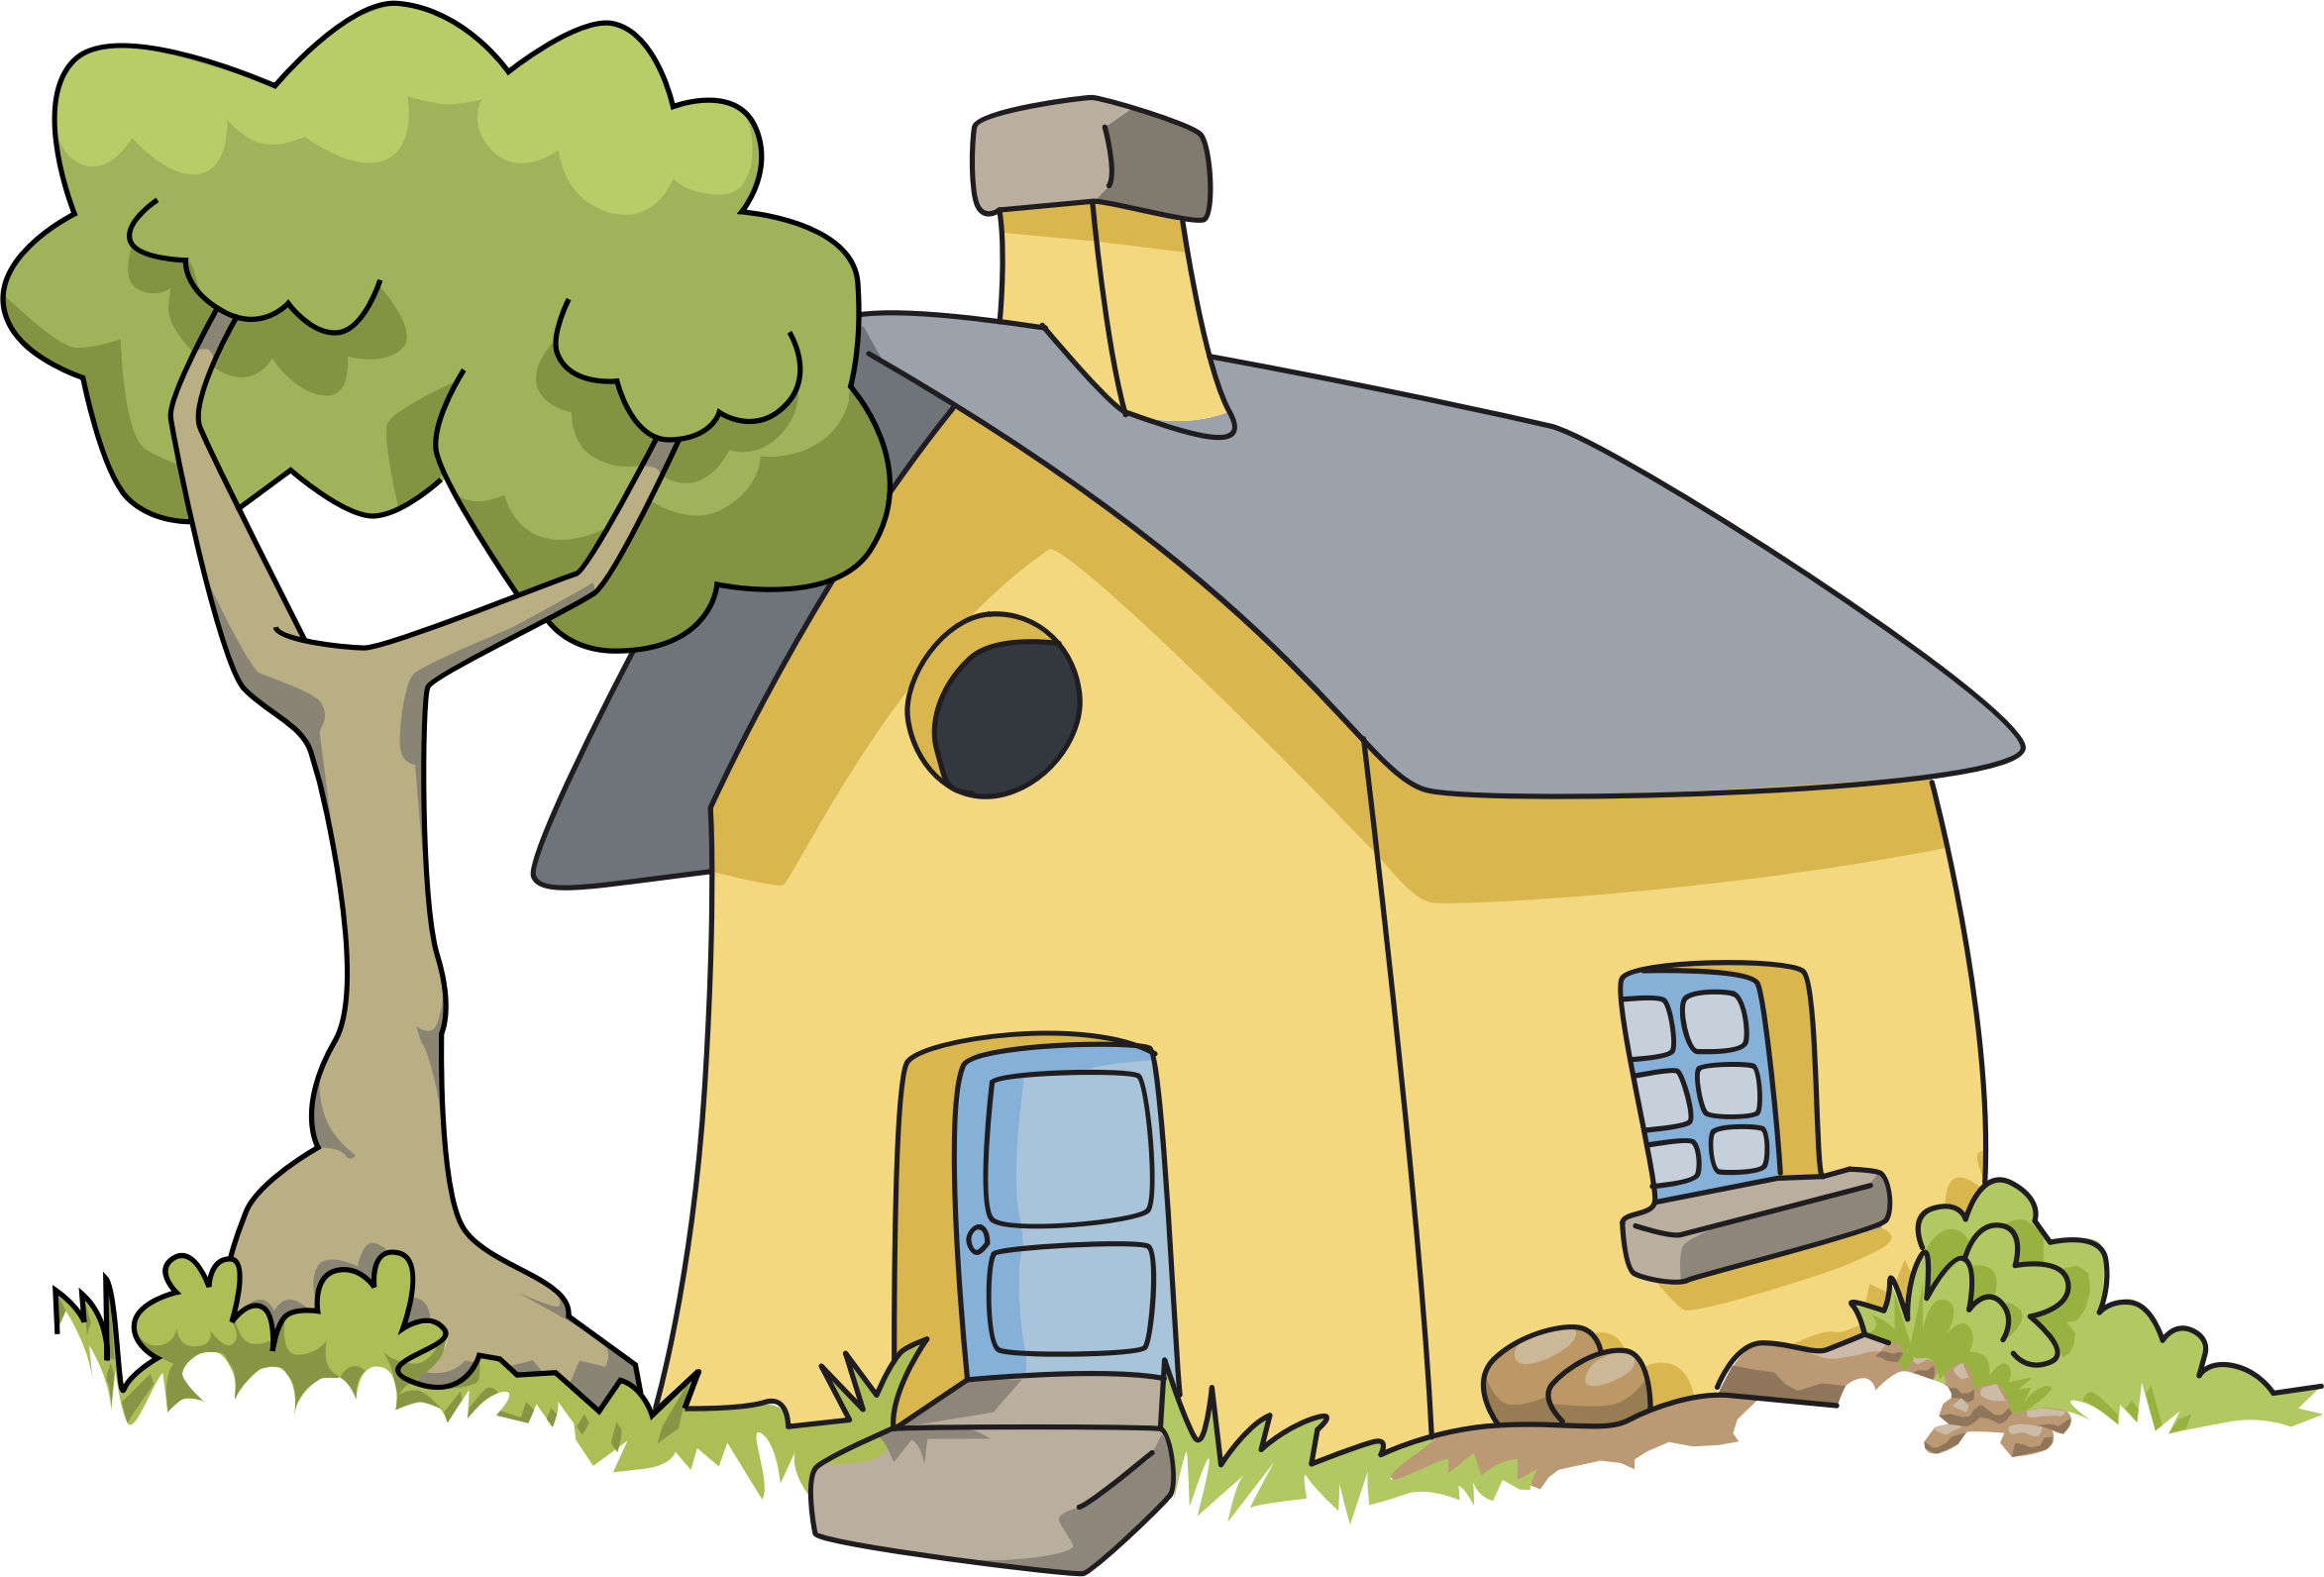 Kawaii clipart house. Of tree icons png